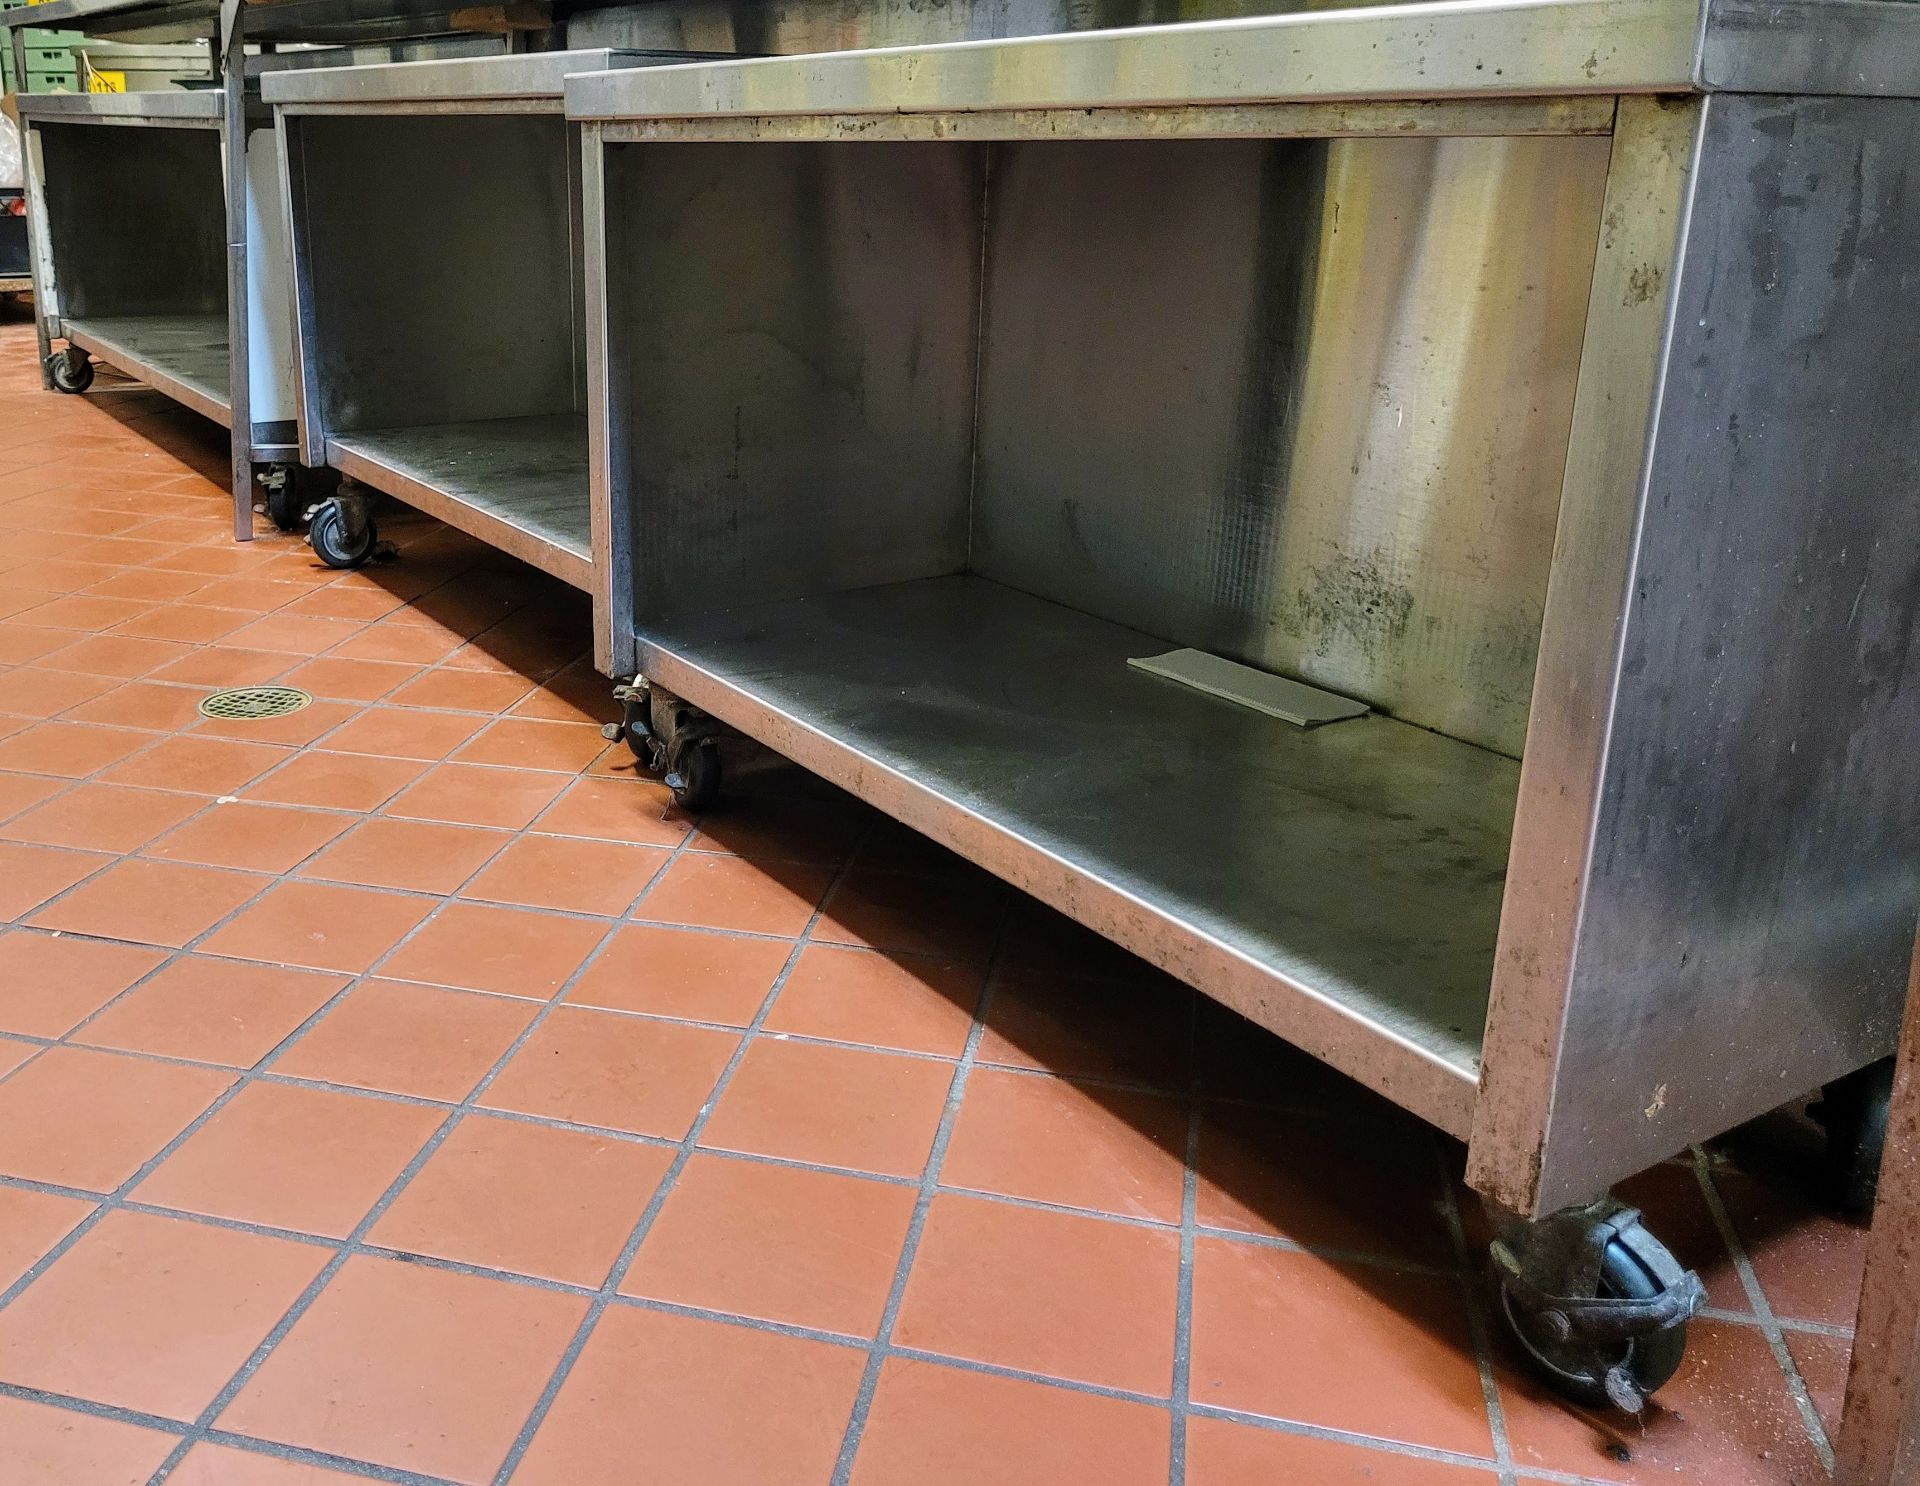 LOT - (3) PORTABLE STAINLESS STEEL UNITS - (42"L X 19"W X 32"H)